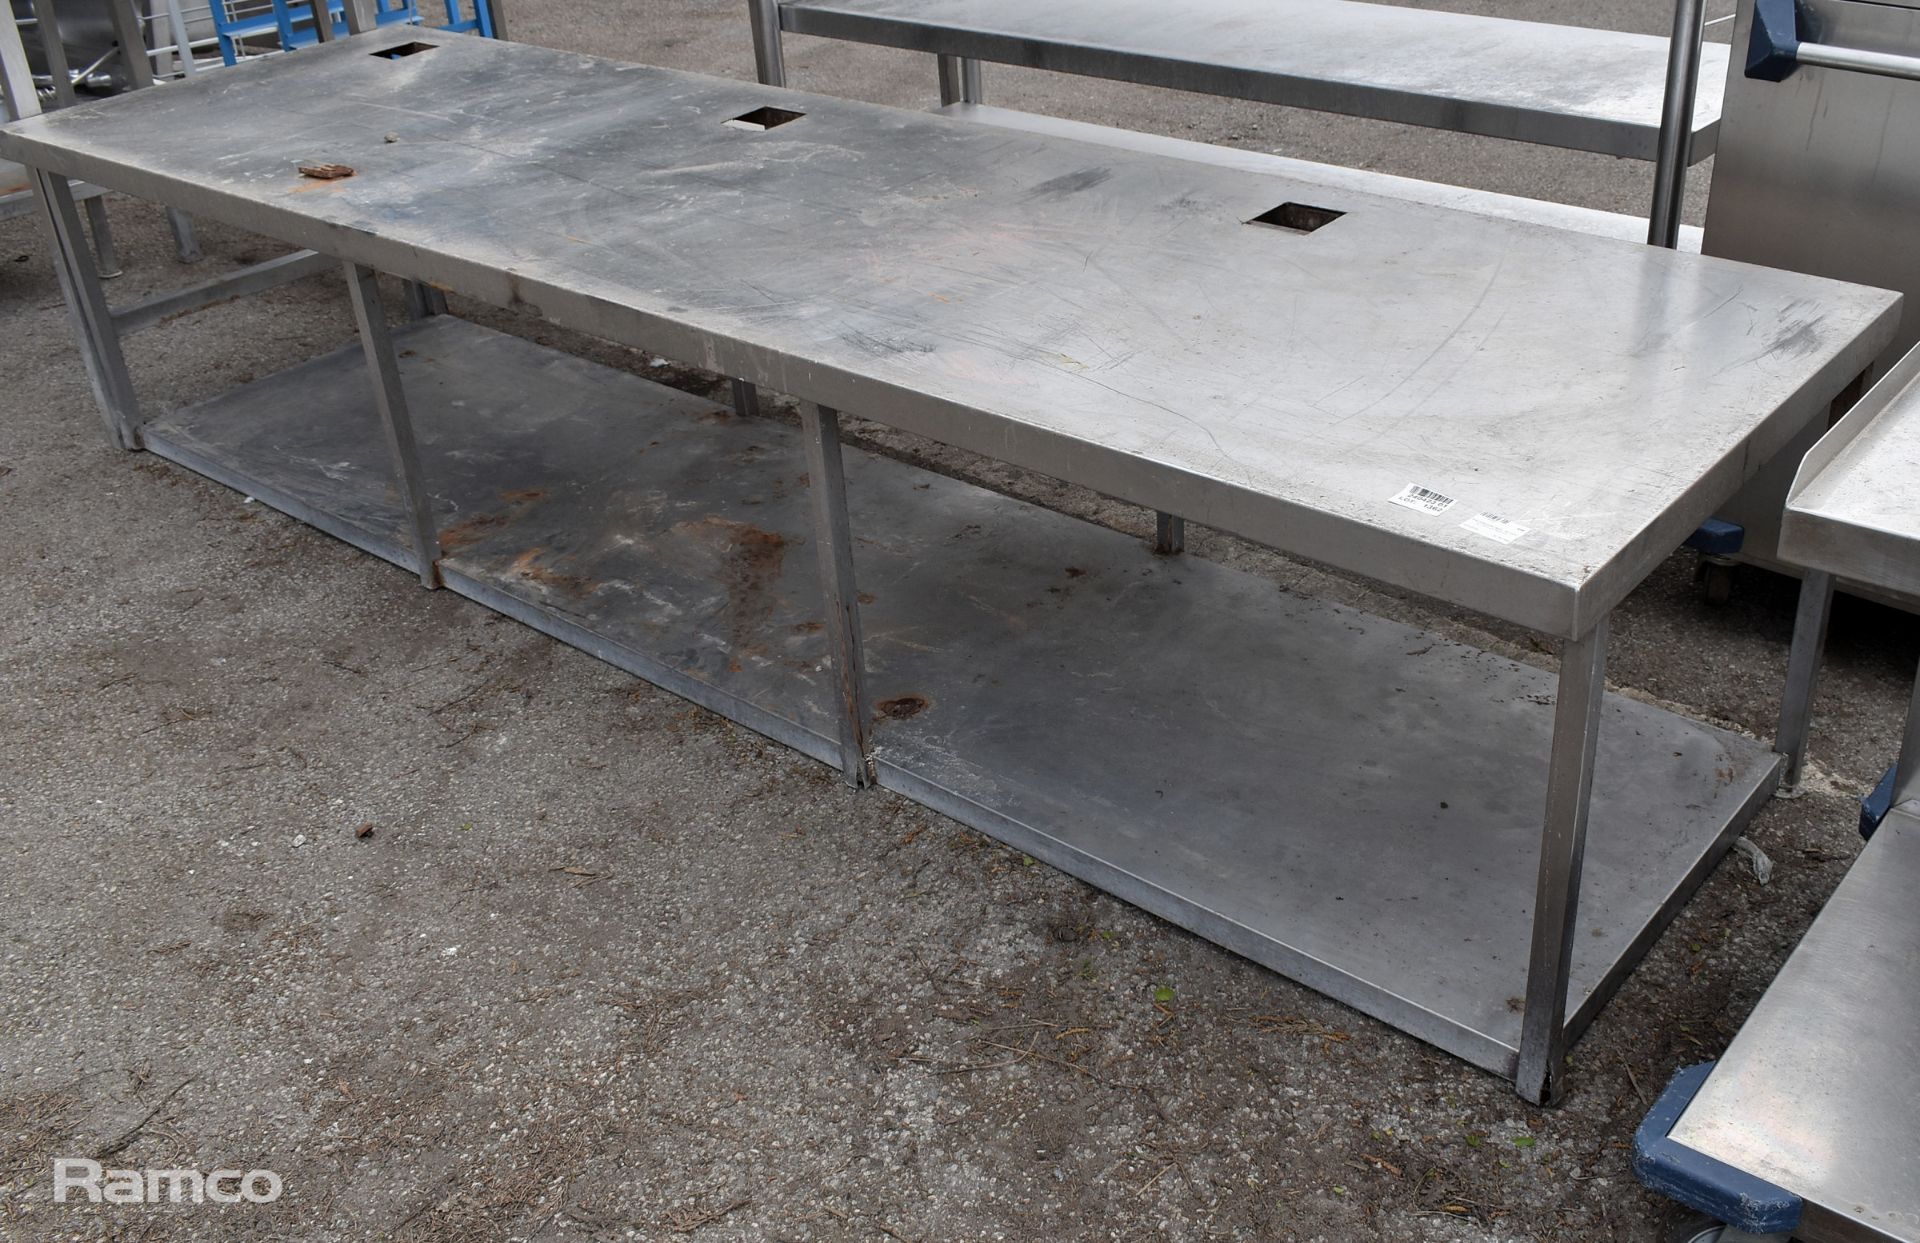 Stainless steel table - W 2850 x D 660 x H 620mm - Image 2 of 4